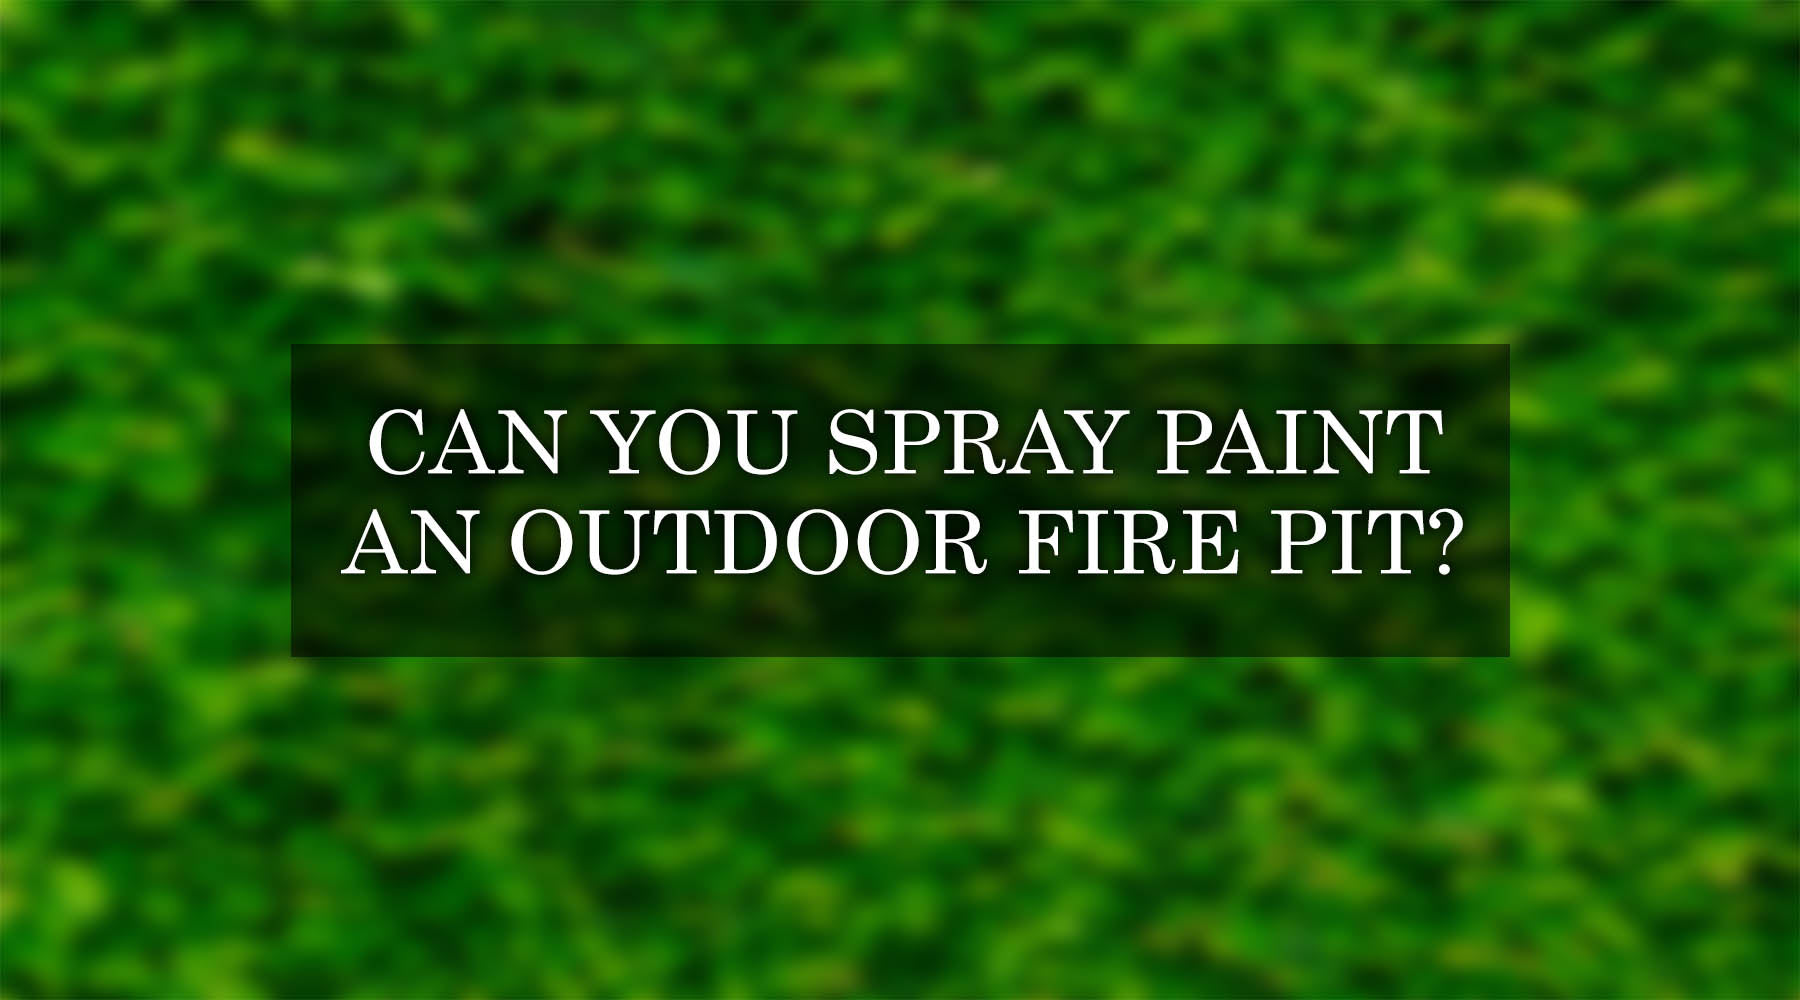 Can You Spray Paint an Outdoor Fire Pit?